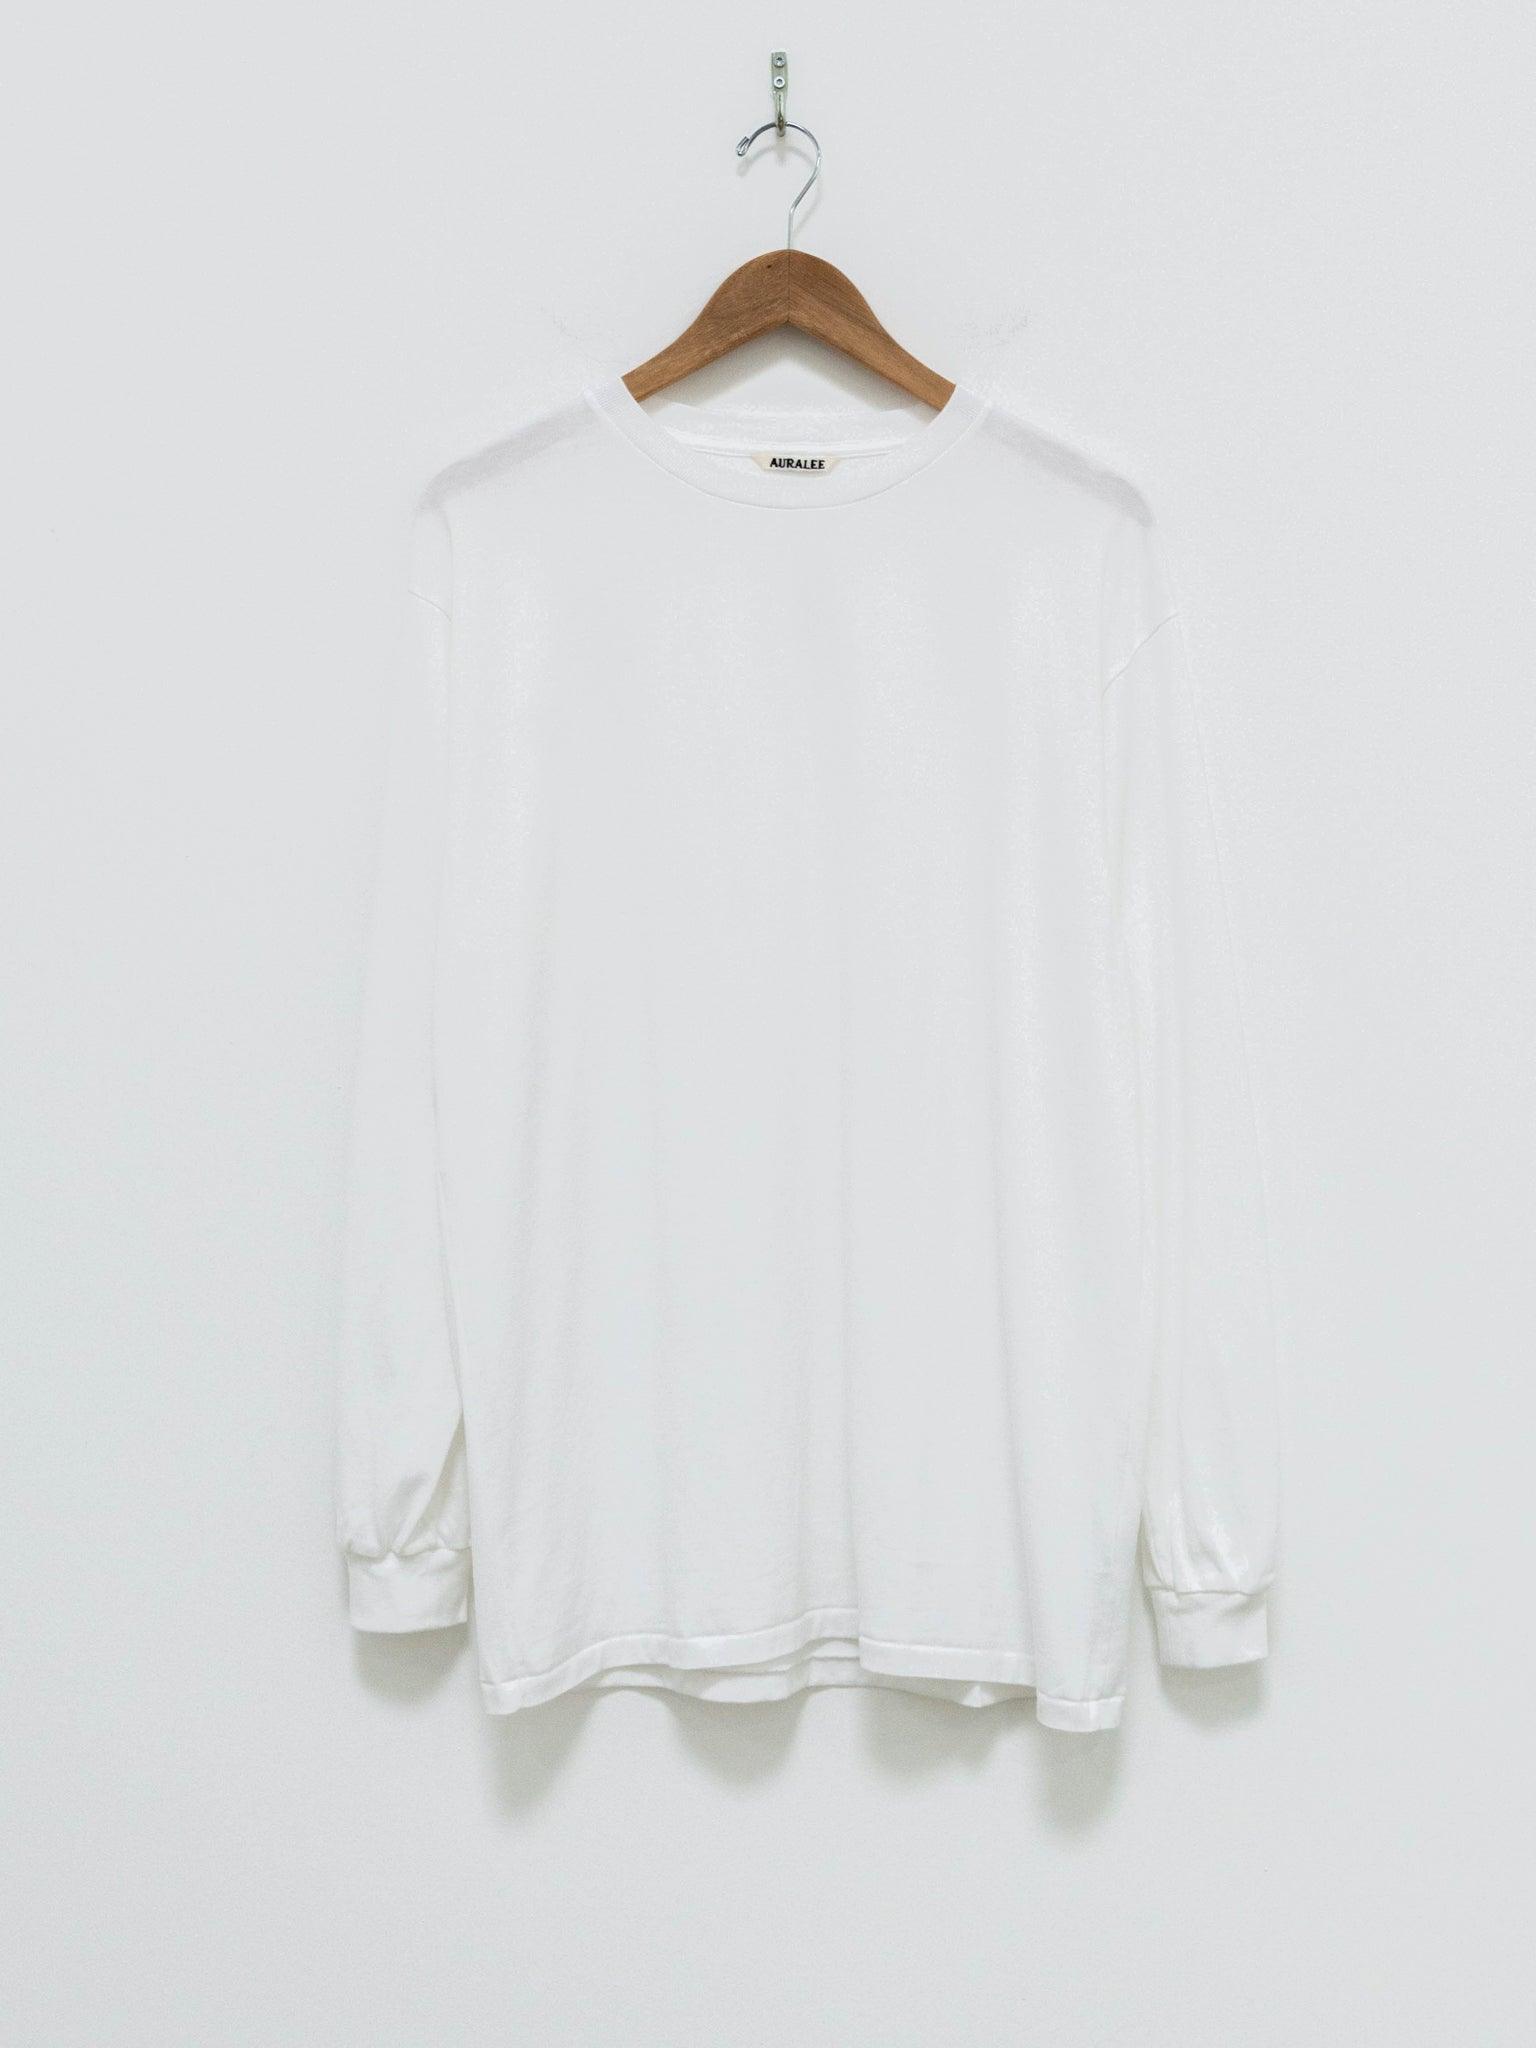 Luster Plaiting L/S Tee - White